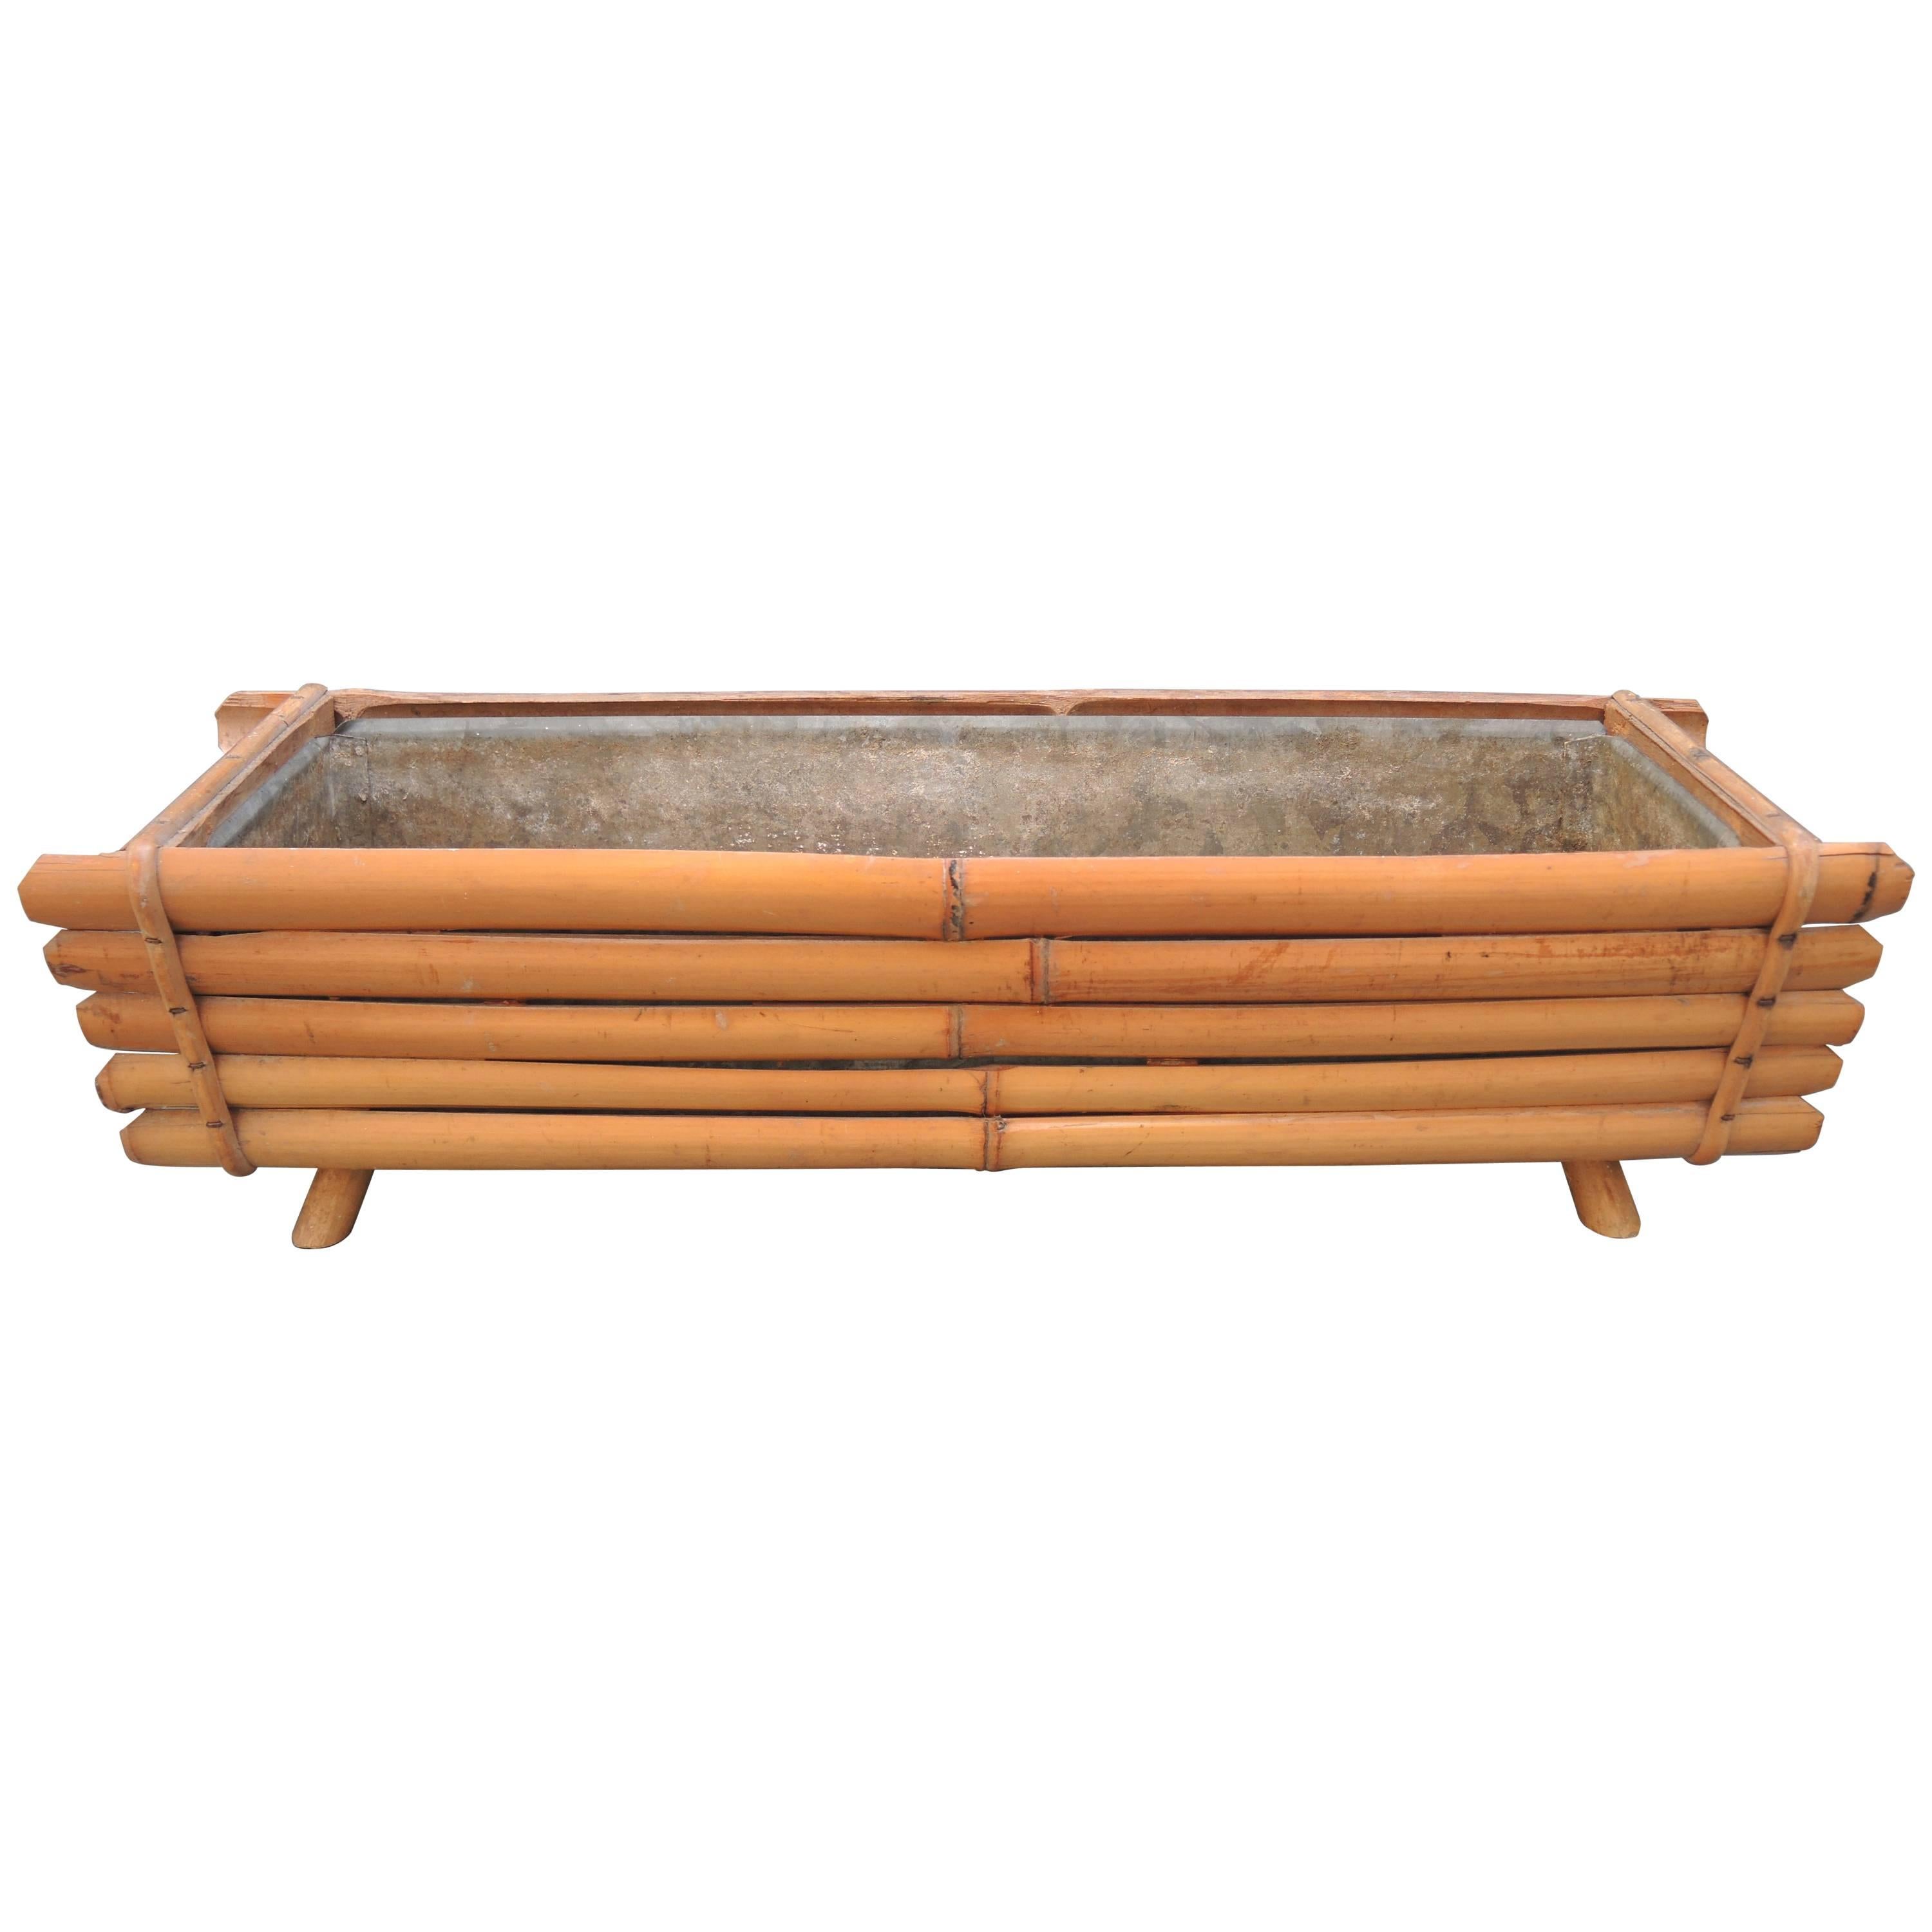 Midcentury Bamboo Planter with Zinc Liner For Sale